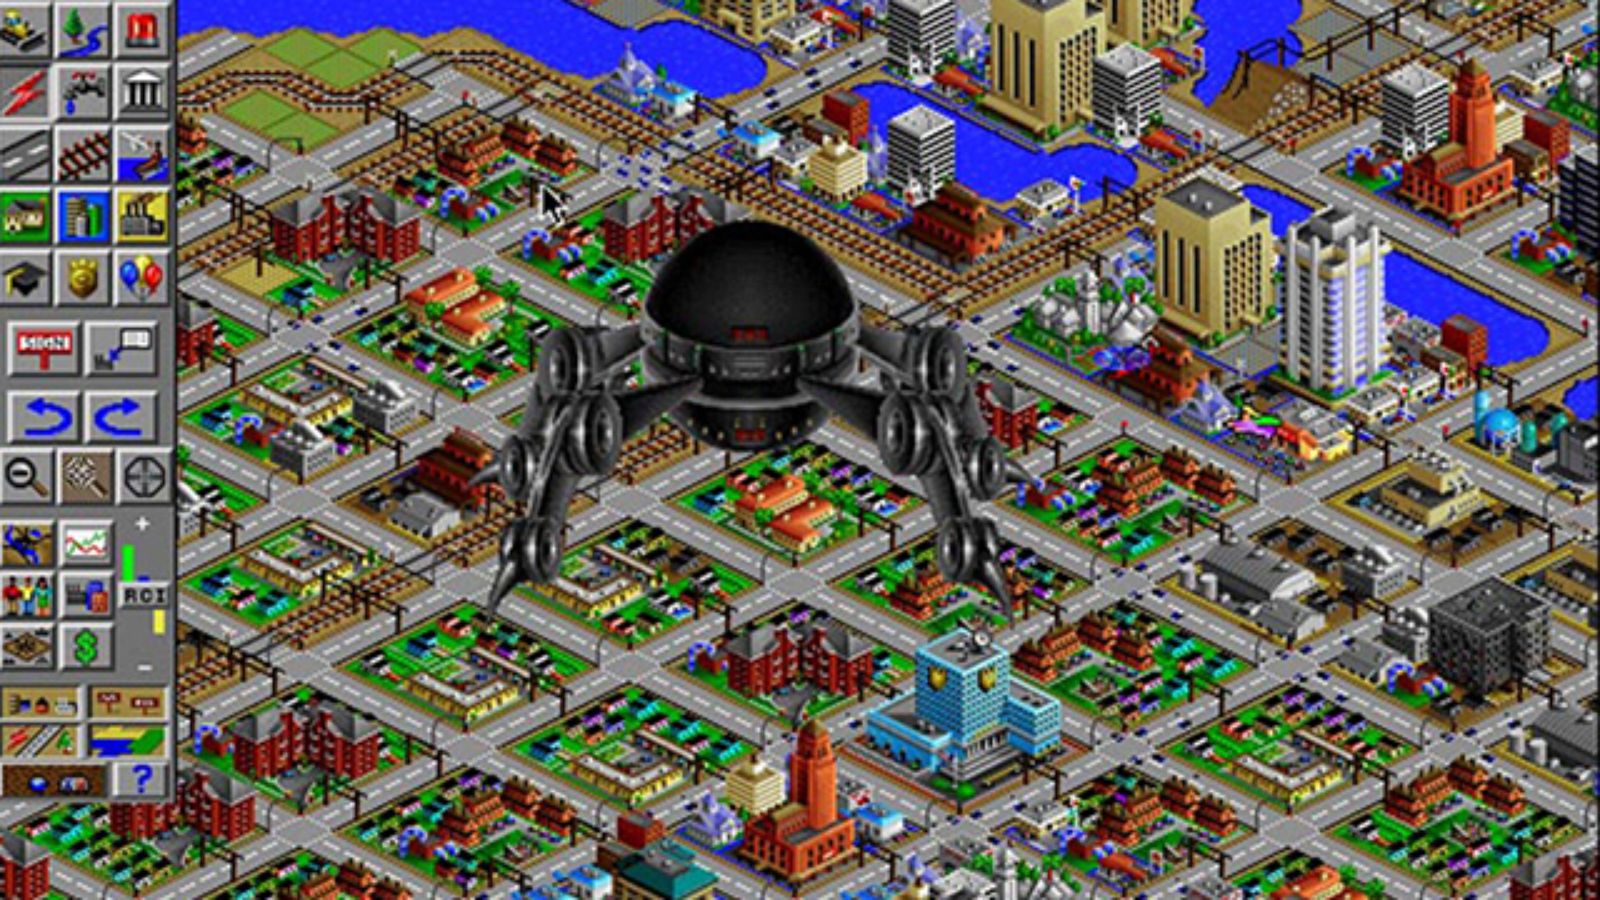 simcity download free full version